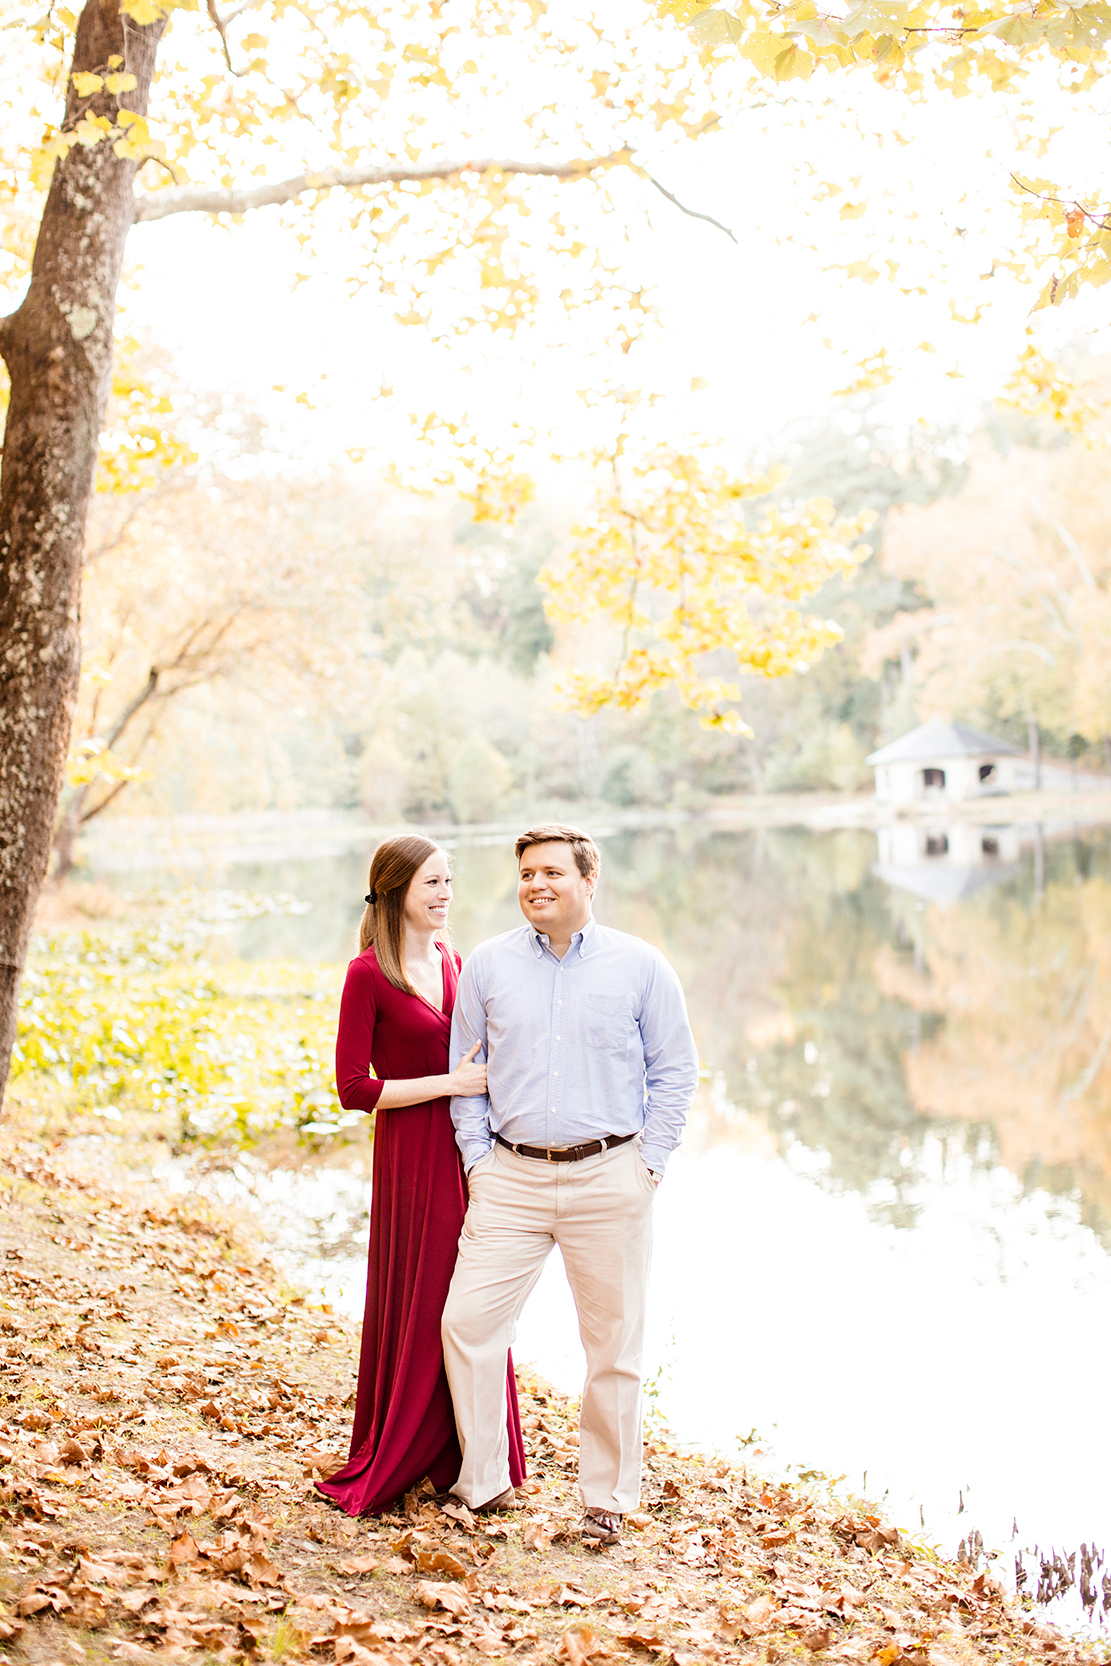 Susan  Sams Fall Engagement Shoot at Forest Hill Park - Image Property of www.j-dphoto.com